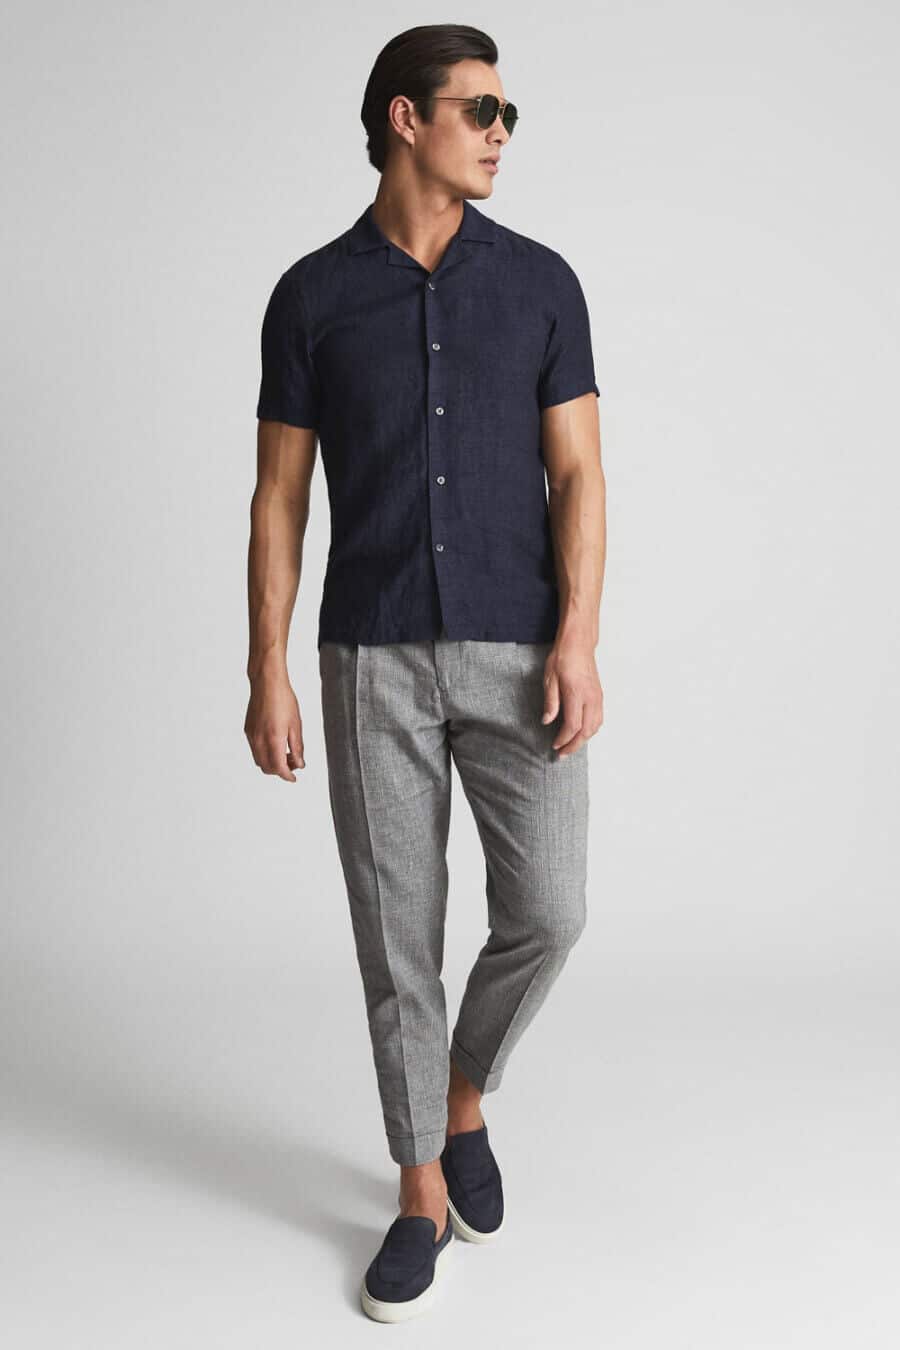 Men's short sleeve navy linen shirt with cropped trousers and loafers outfit